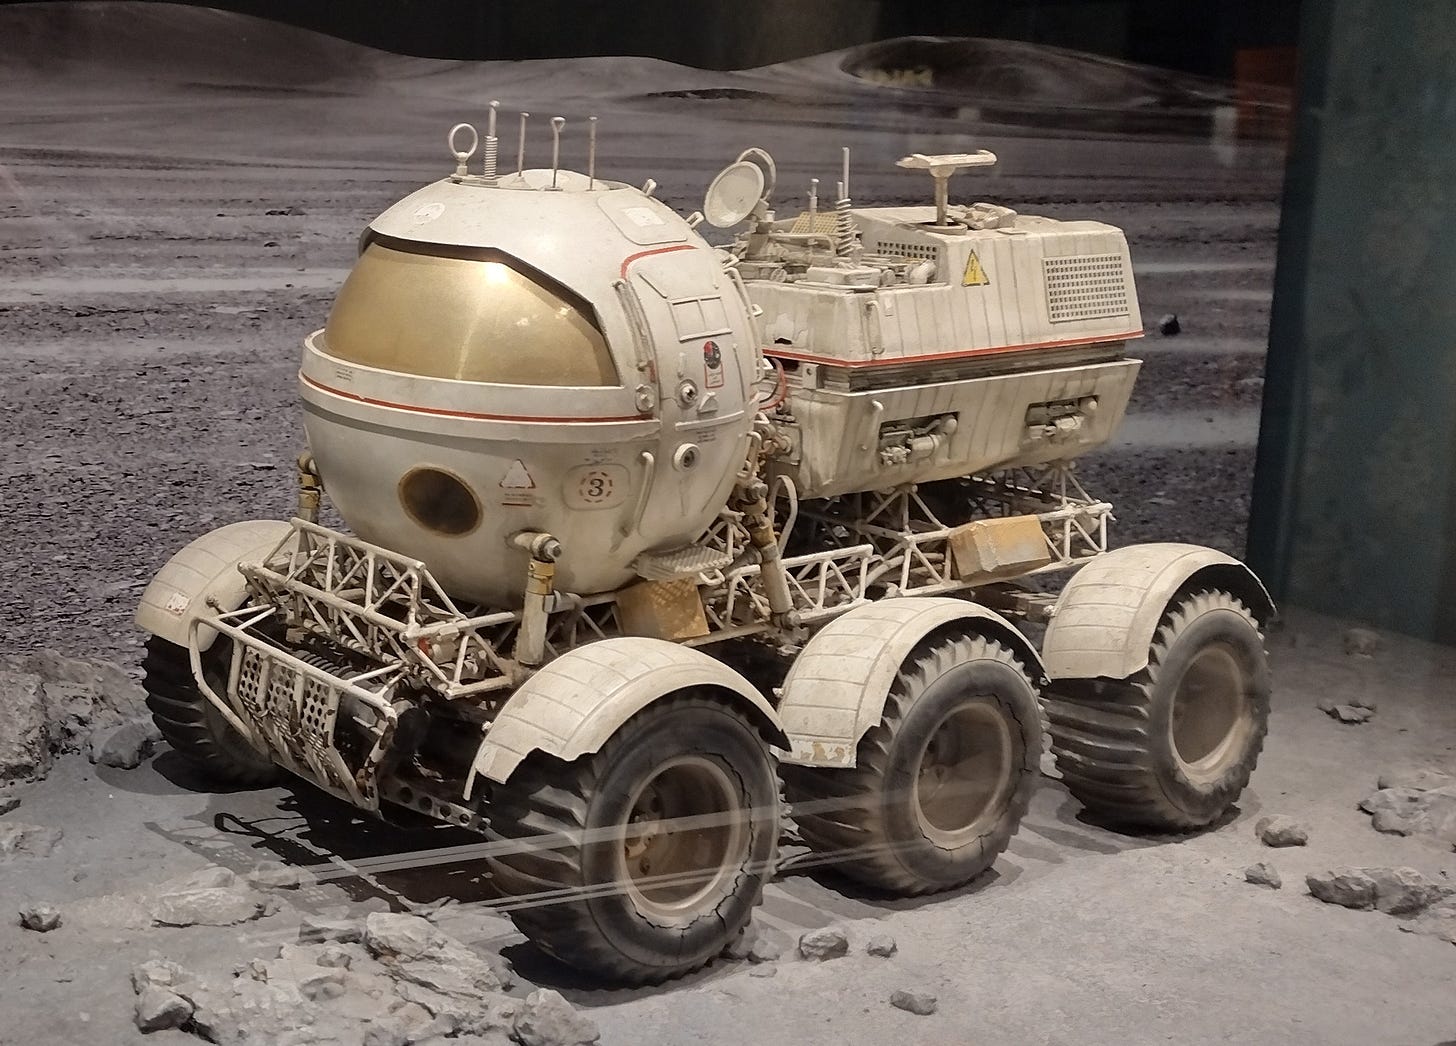 A model of a moon buggy used in the series Star Cops